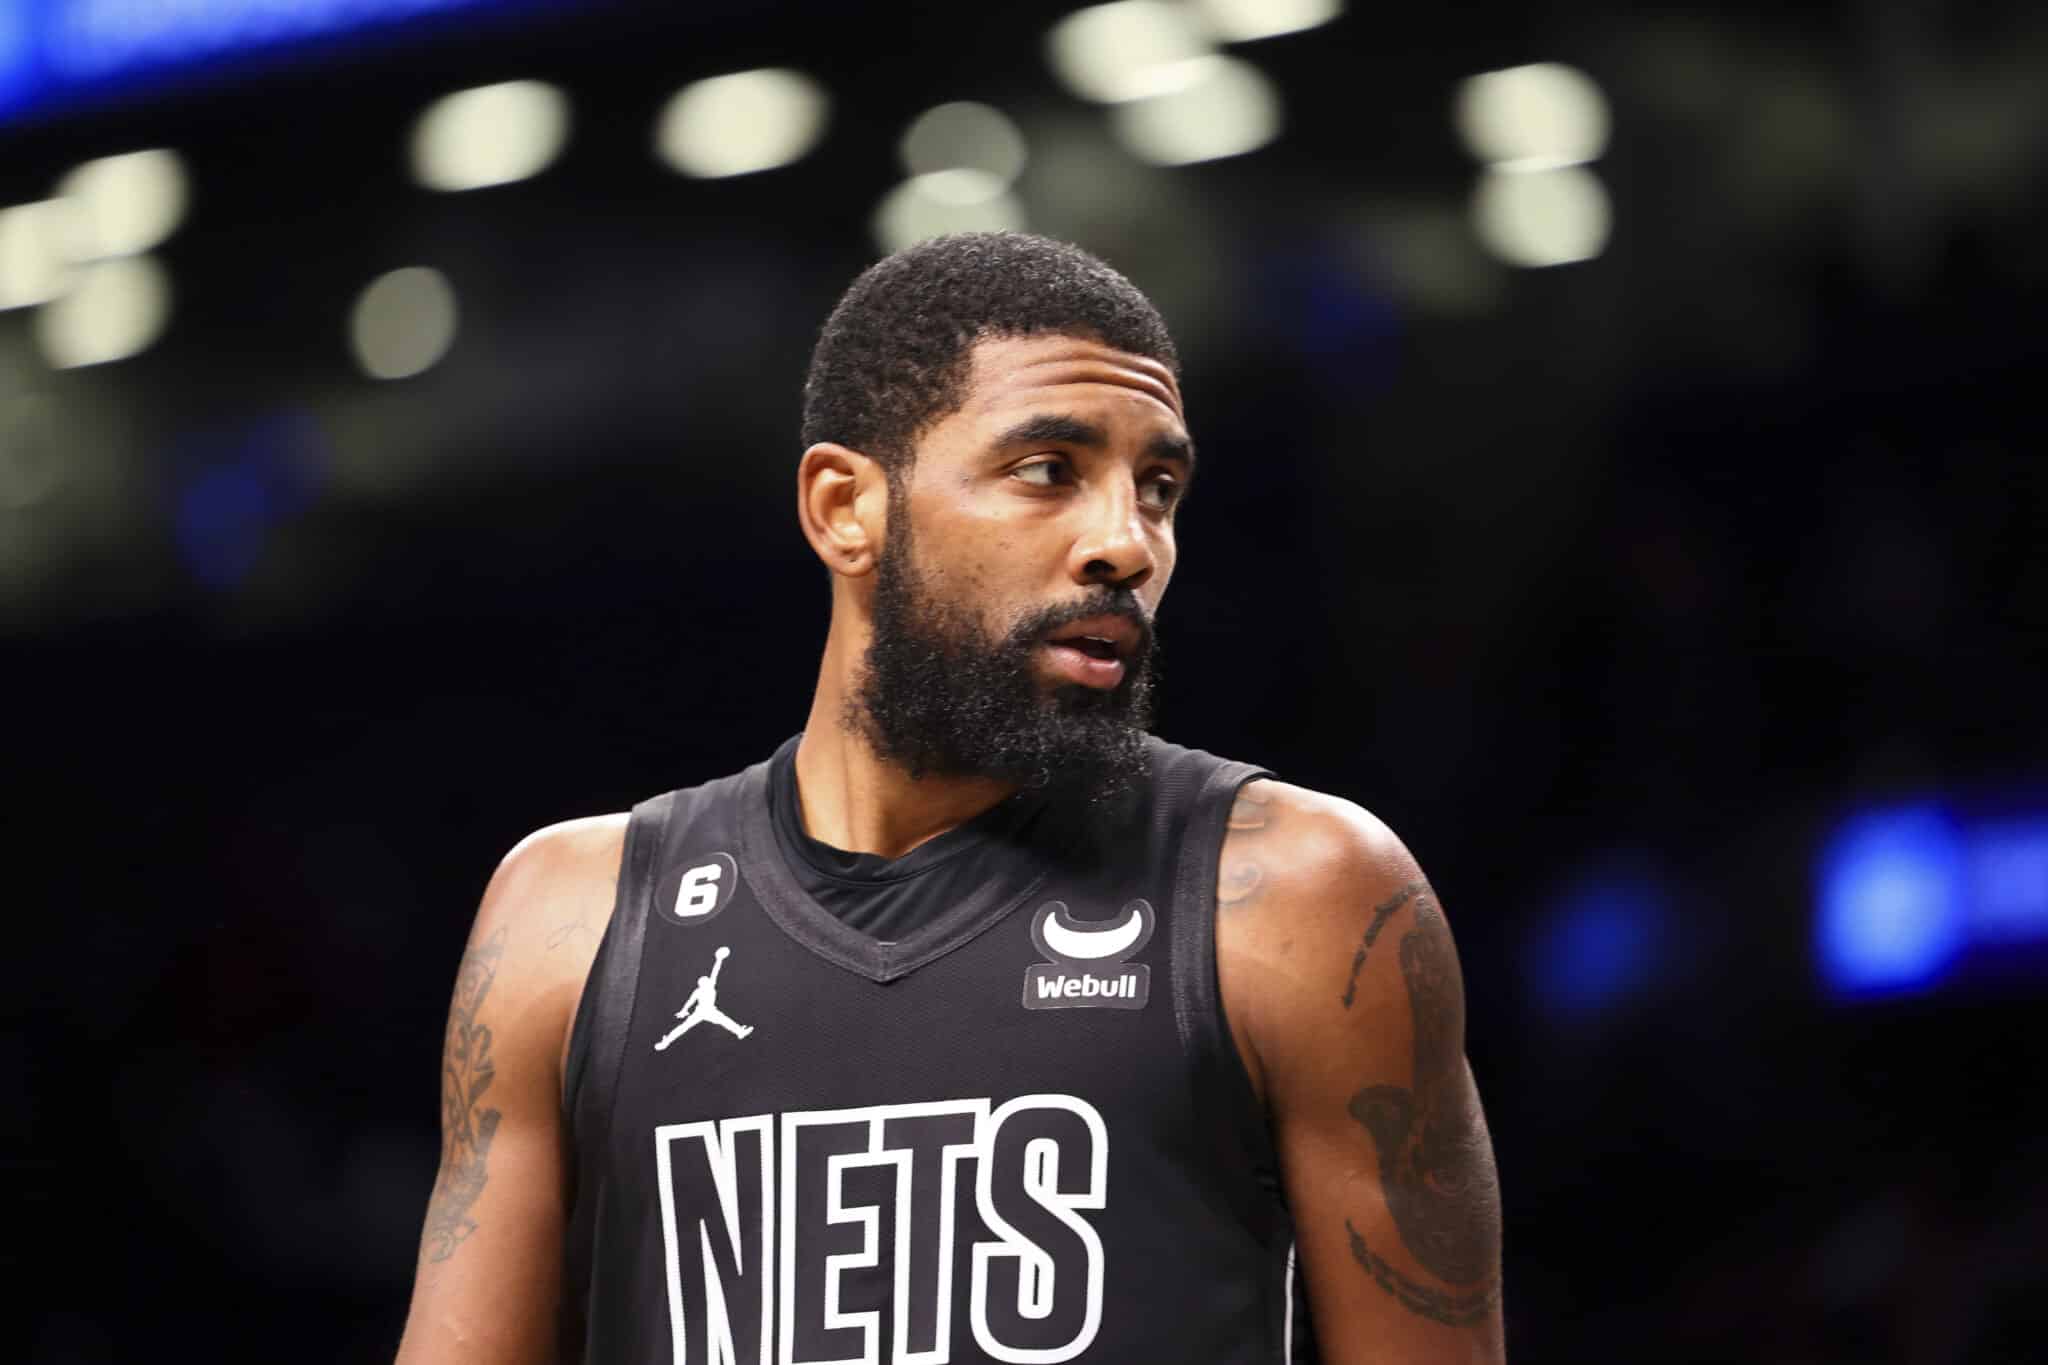 Brooklyn Nets guard Kyrie Irving looks out during the first half of an NBA basketball game against the Indiana Pacers Monday, Oct. 31, 2022, in New York. (AP Photo/Jessie Alcheh)